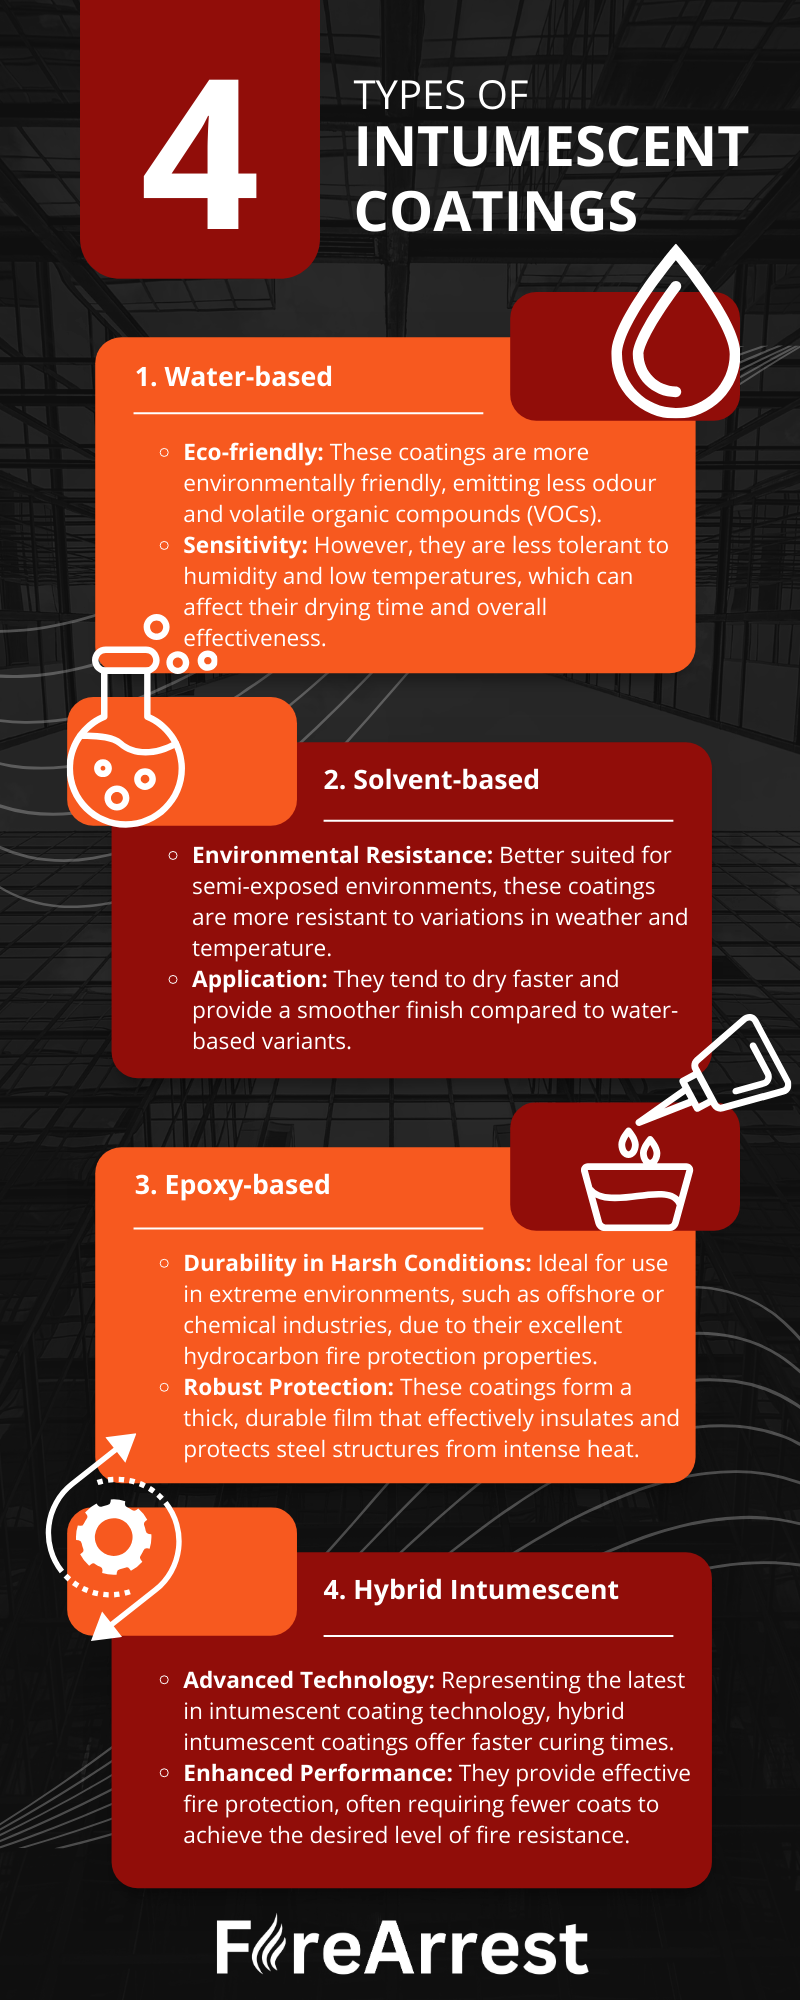 Types of Intumescent Coatings Infographic